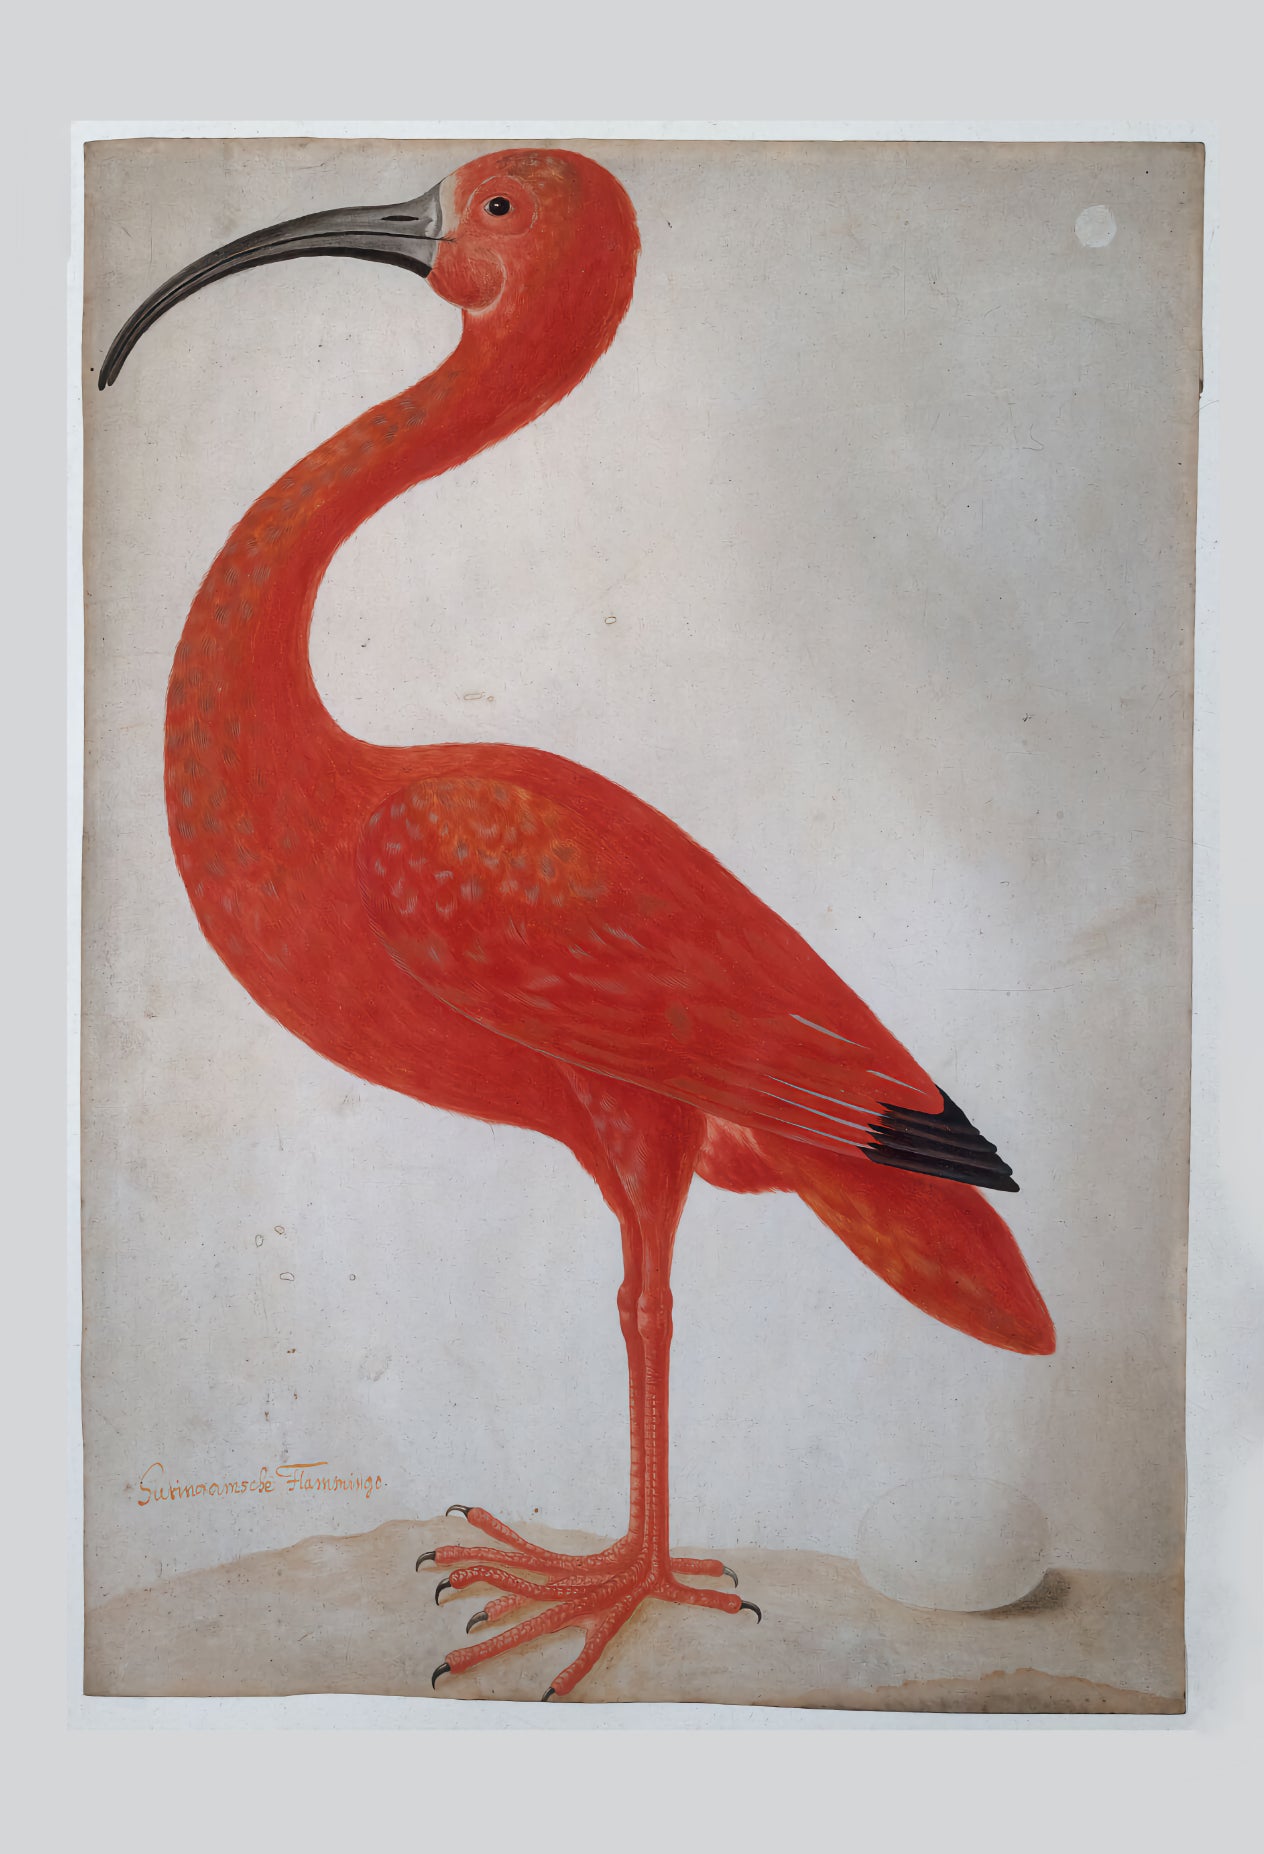 Scarlet Ibis with an Egg by Dorothea Maria Gsell, 1699 - Postcard